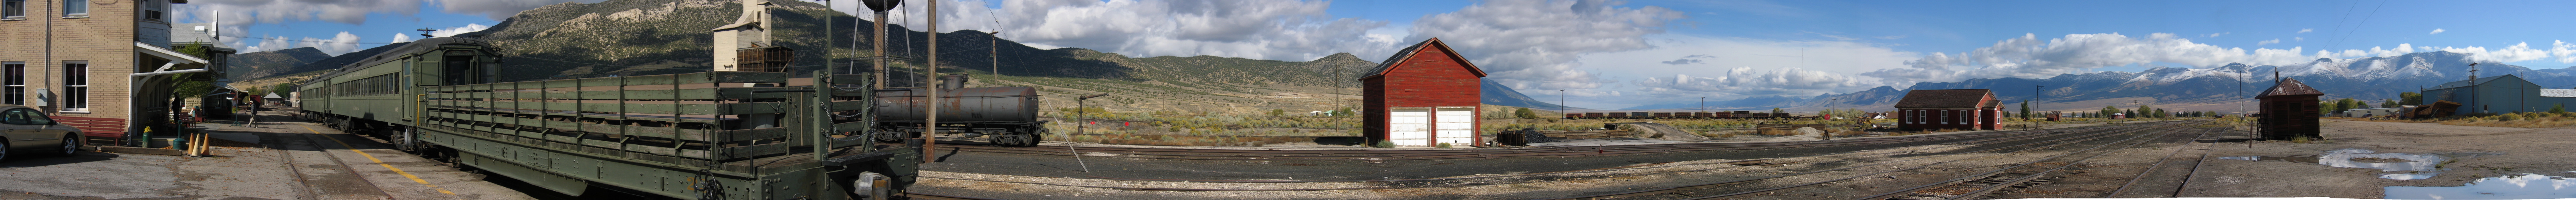 East Ely (NV) Nevada Northern Railroad Depot.